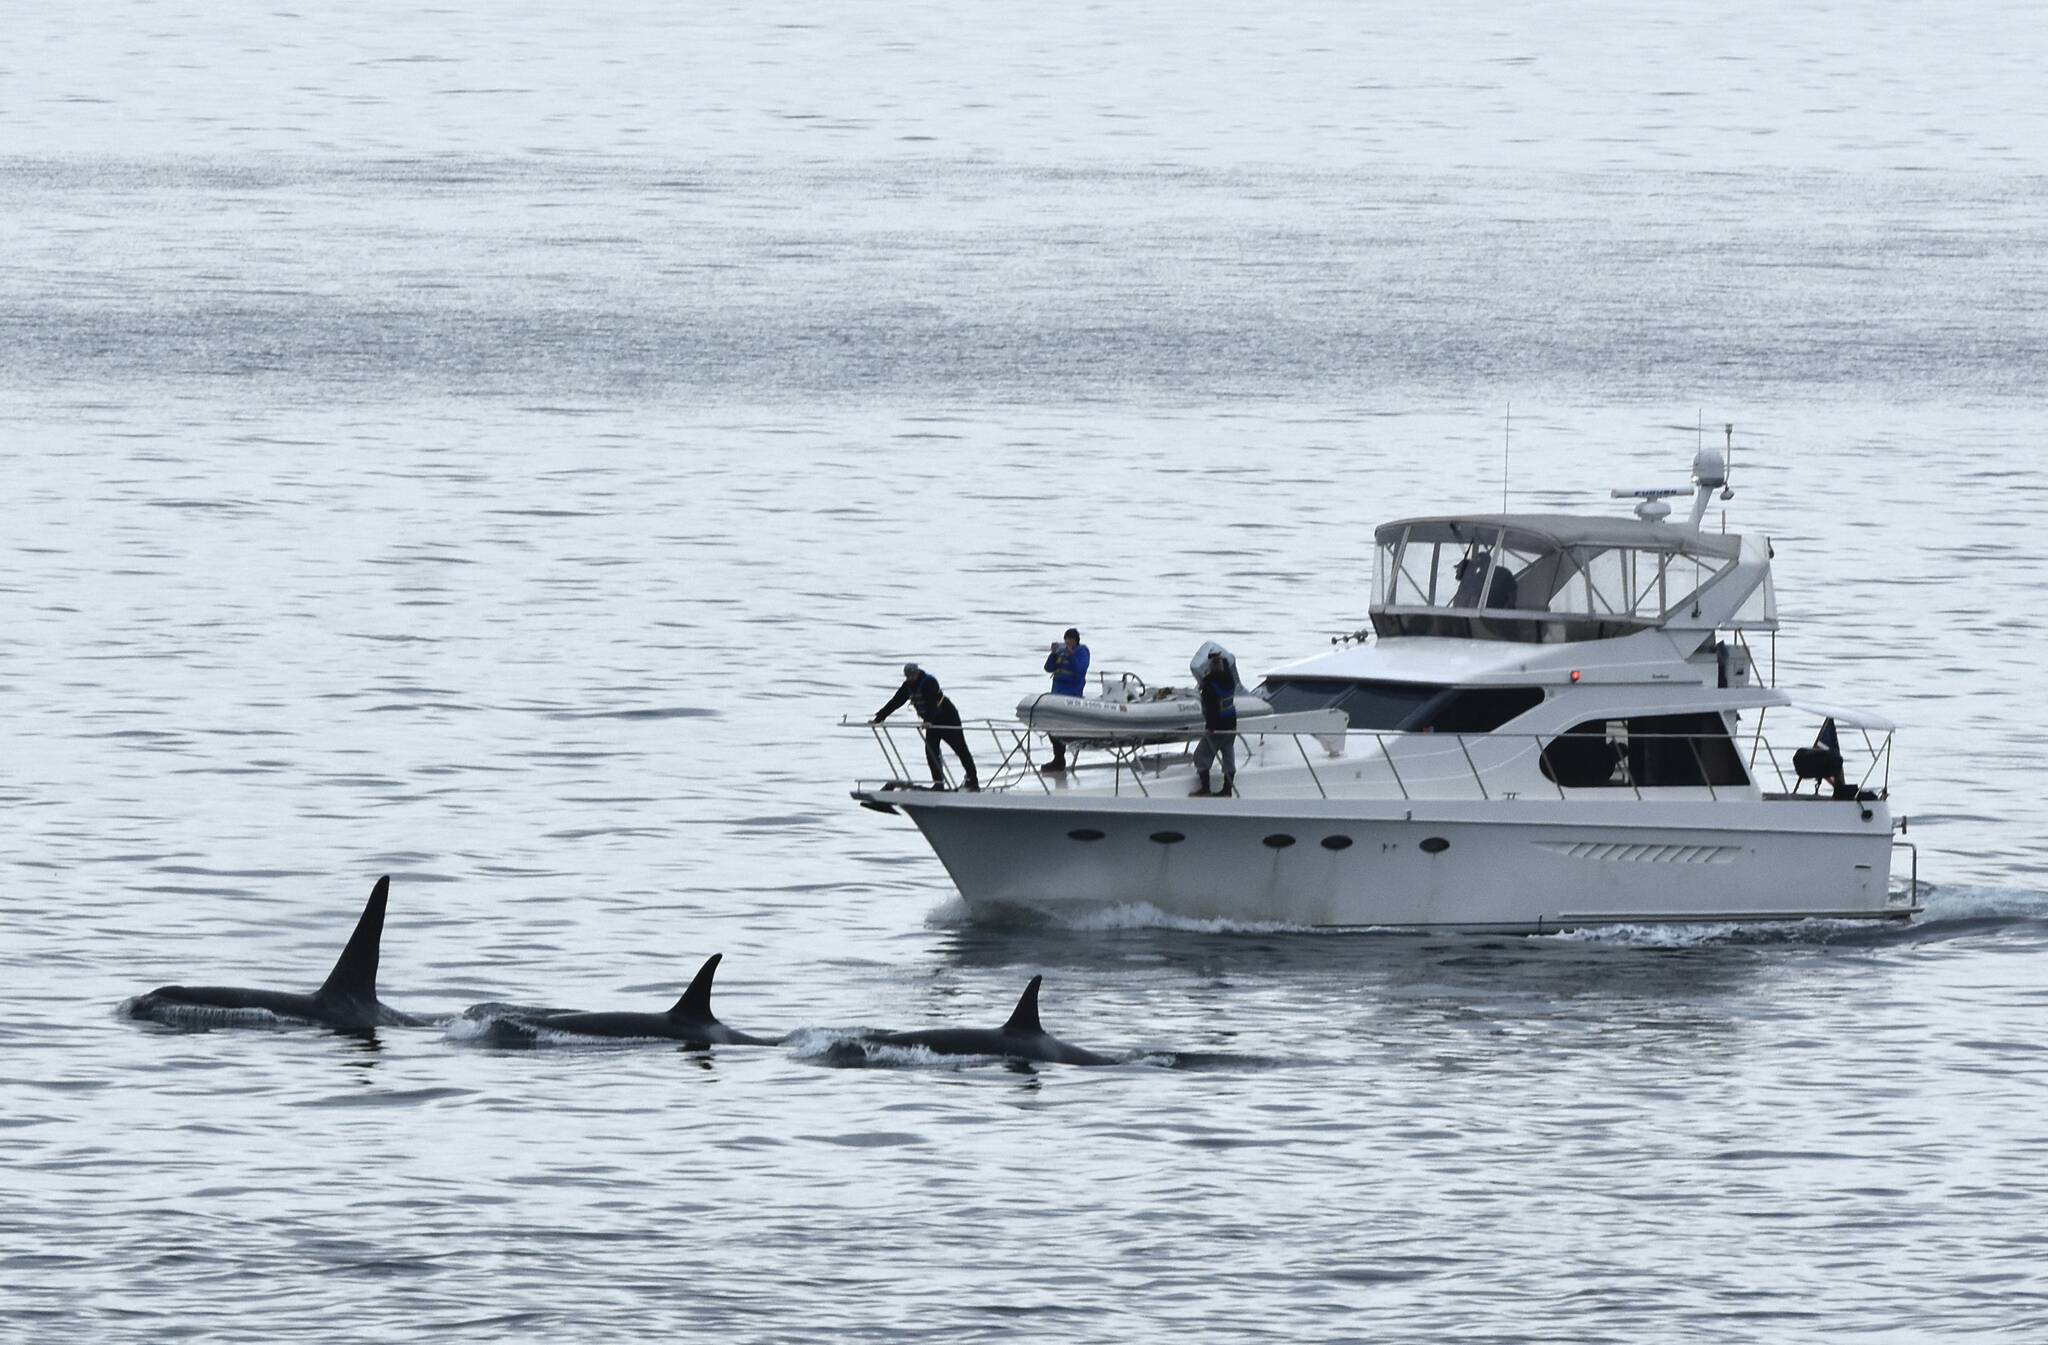 Contributed photo by the Orca Behavior Institute